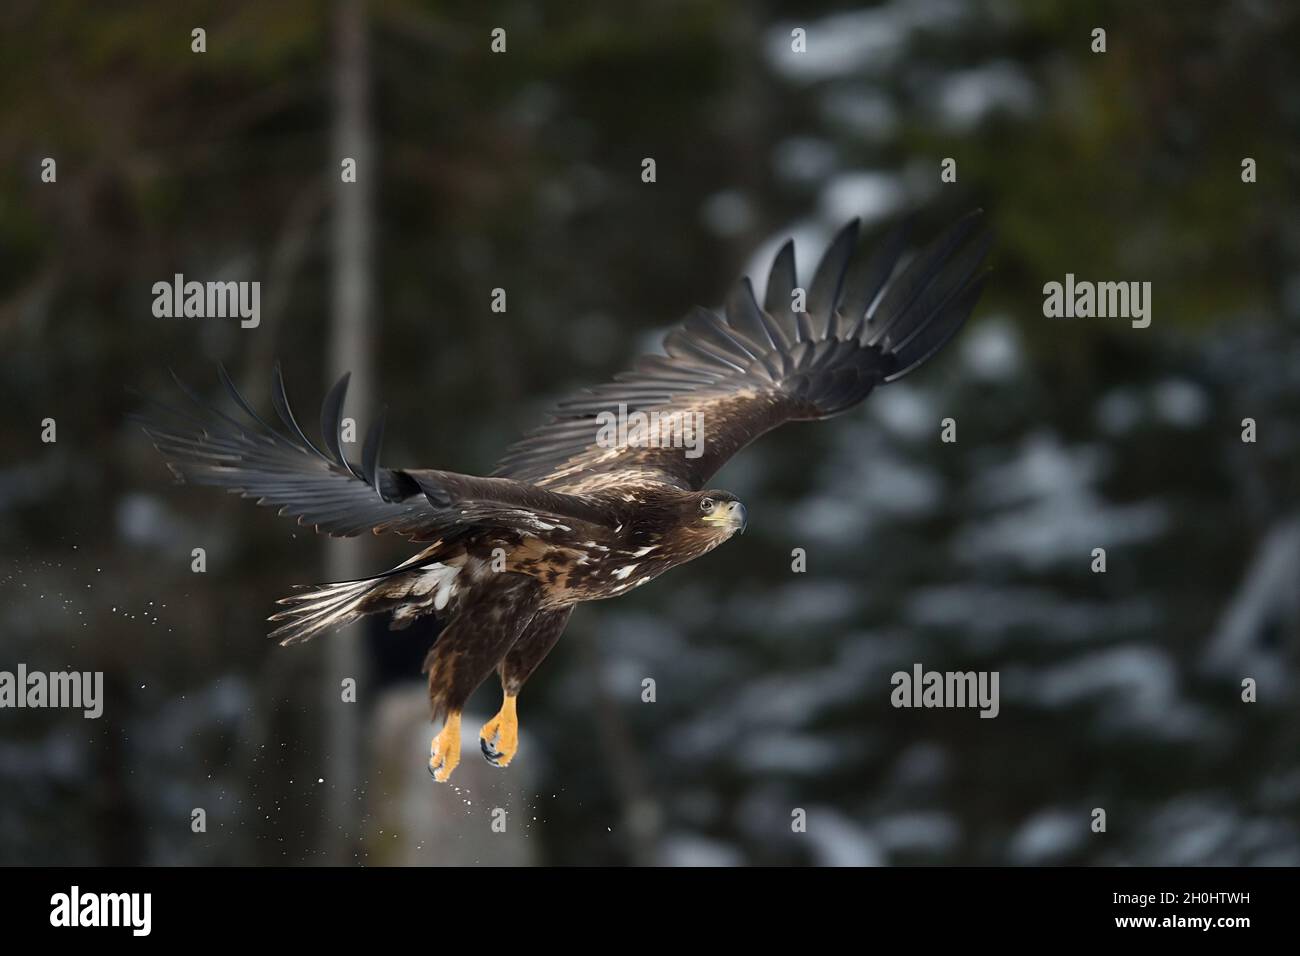 Eagle in flight with forest background Stock Photo